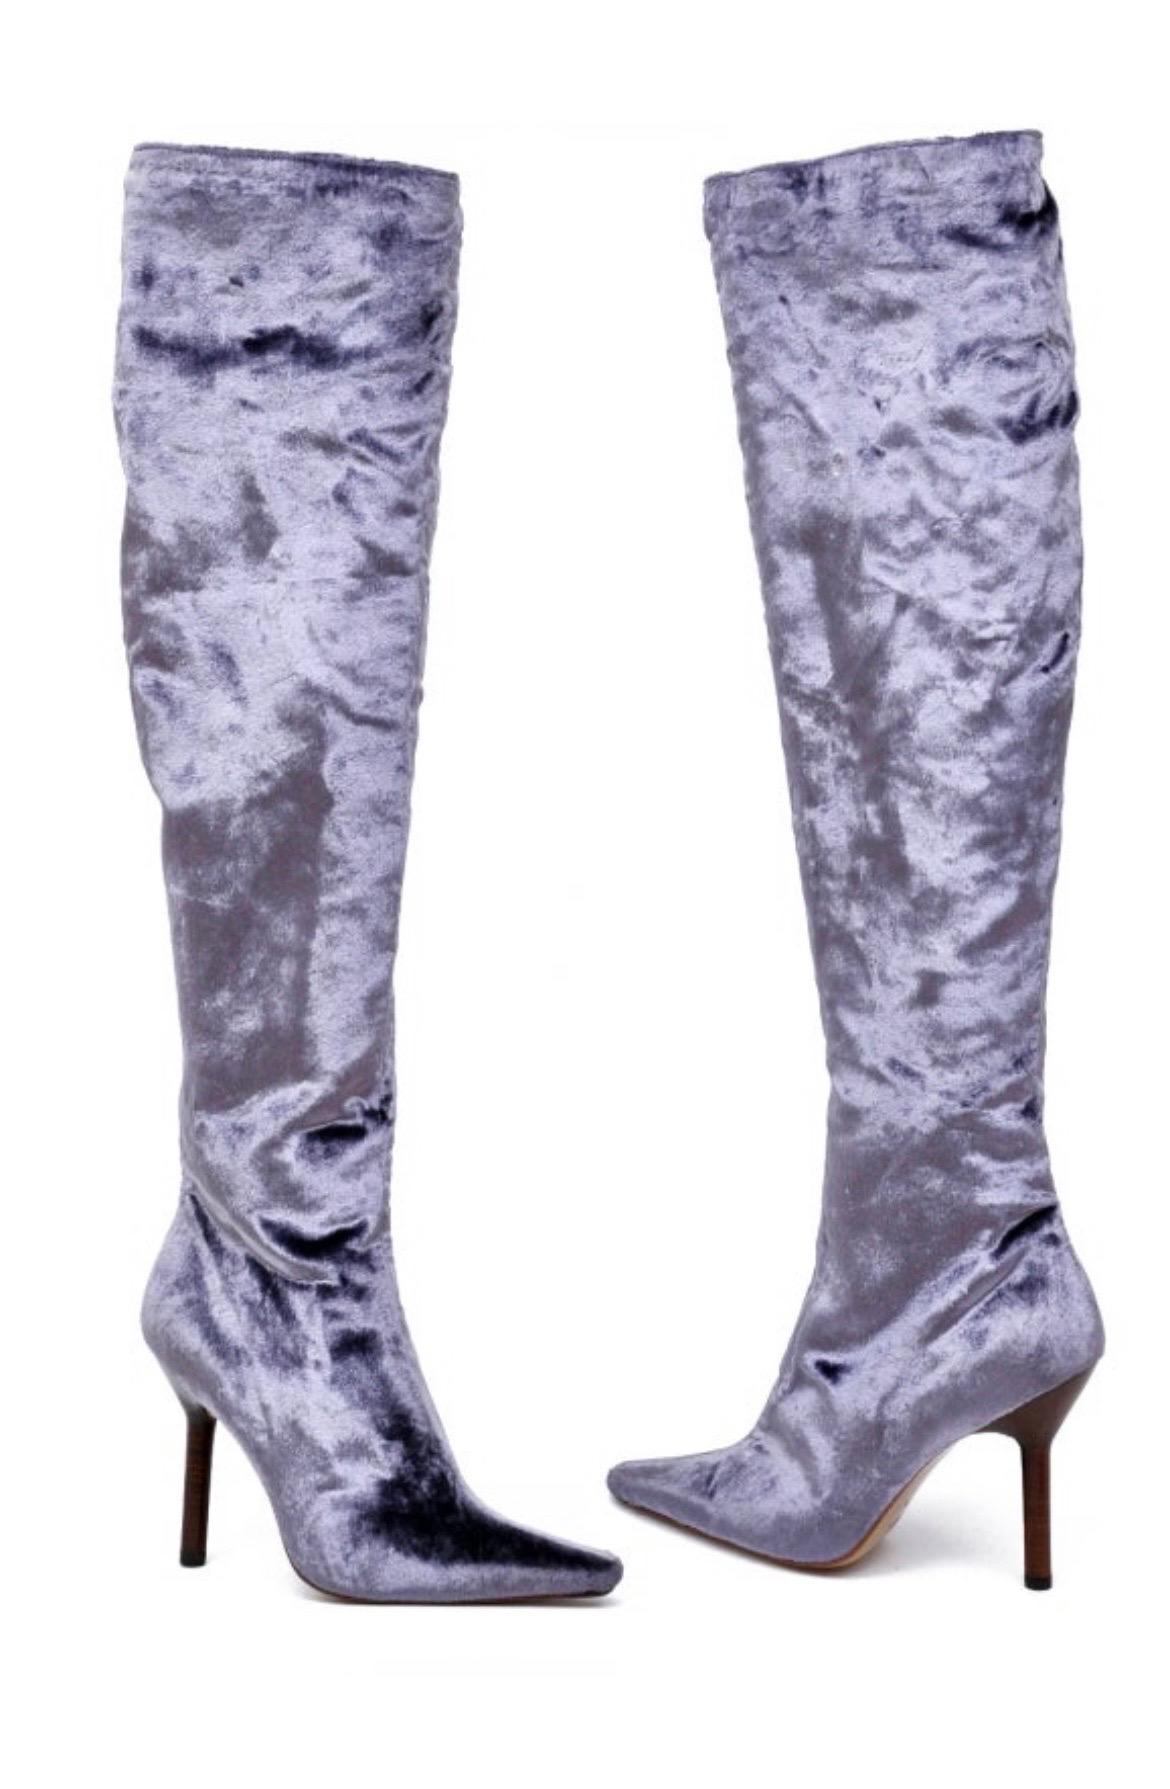 F/W 1999 TOM FORD for GUCCI 
Lavender Velvet Over the knee Boots
RICH, LUXURIOUS AND SEXY!
Composition: Velvet
Leather lining and sole
4